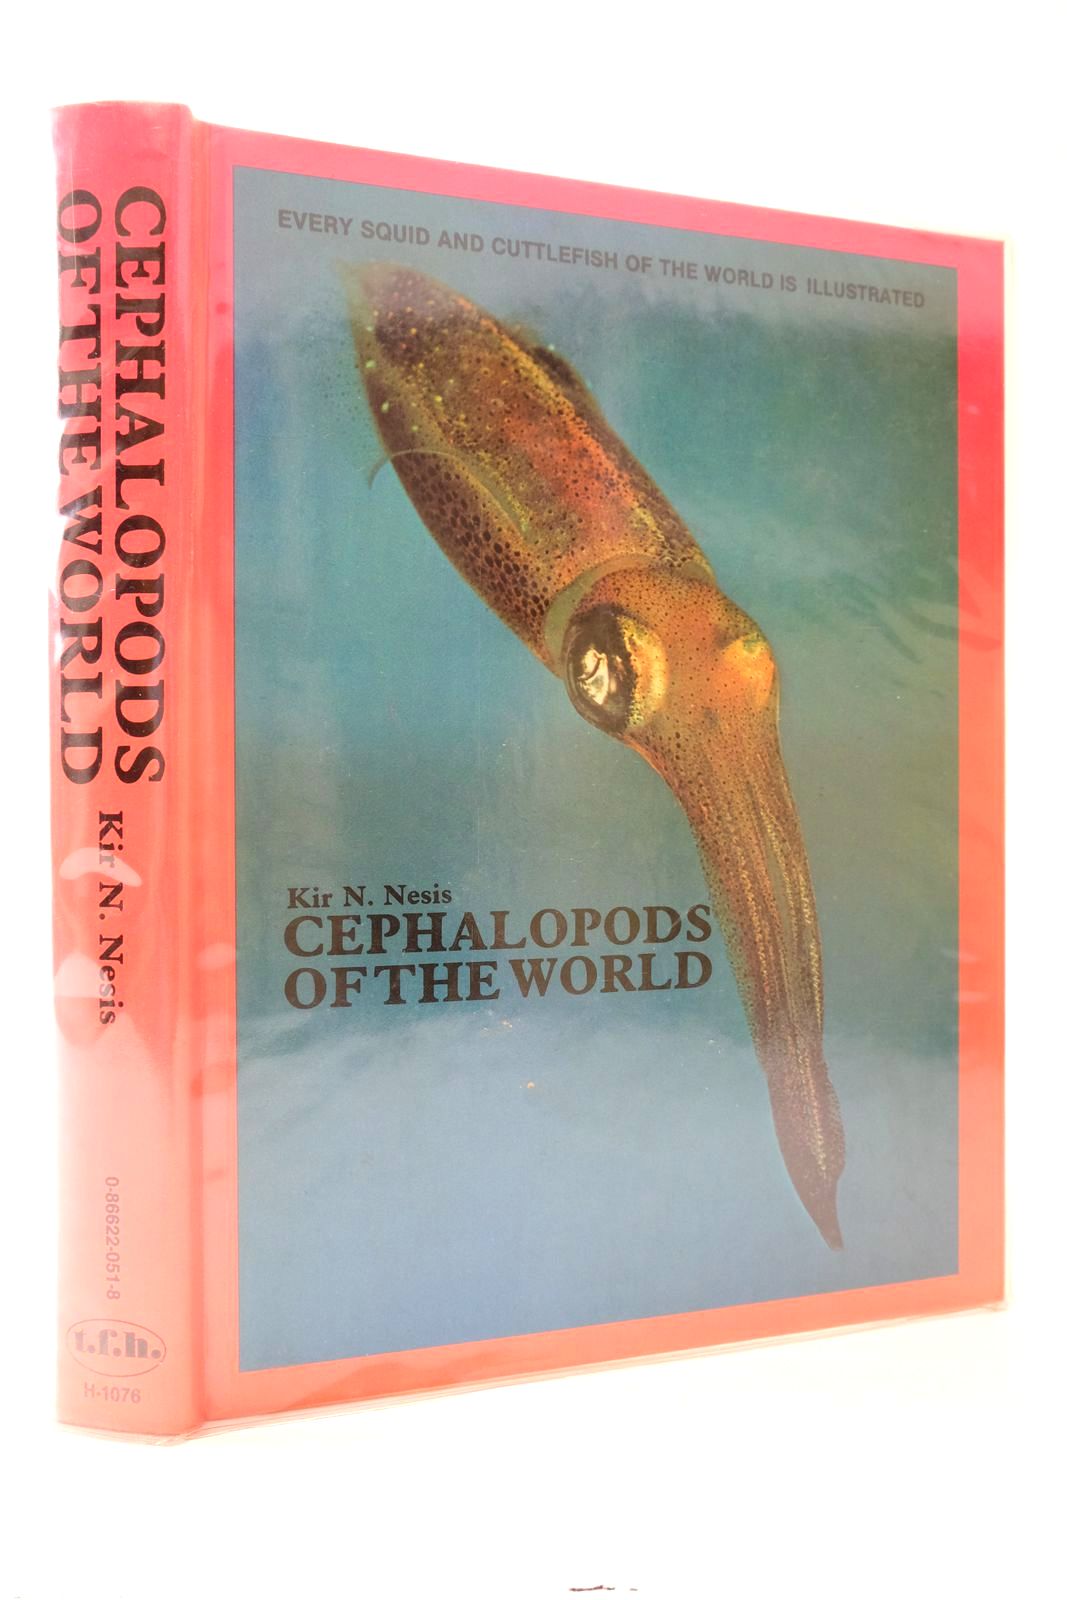 Photo of CEPHALOPODS OF THE WORLD: SQUIDS, CUTTLEFISHES, OCTOPUSES, AND ALLIES written by Nesis, Kir N. Levitov, B.S. Burgess, Lourdes A. published by T.F.H. Publications, Inc. Ltd. (STOCK CODE: 2139613)  for sale by Stella & Rose's Books